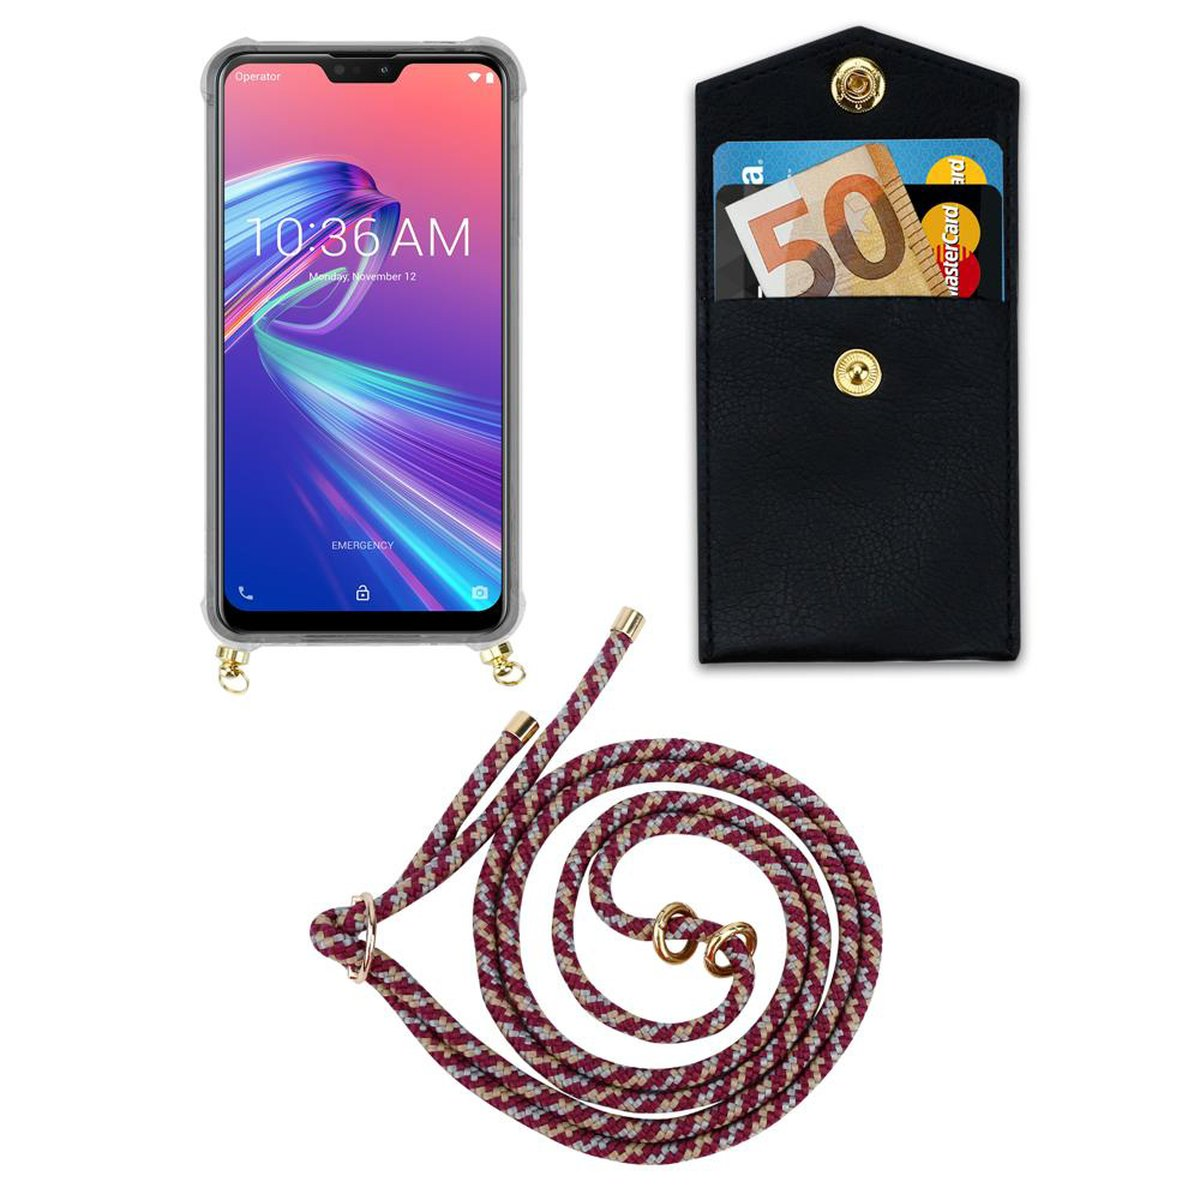 CADORABO Handy Kette mit Gold Kordel und WEIß ZenFone MAX Zoll), Band GELB Ringen, Hülle, abnehmbarer Asus, M2 PRO ROT (6.3 Backcover